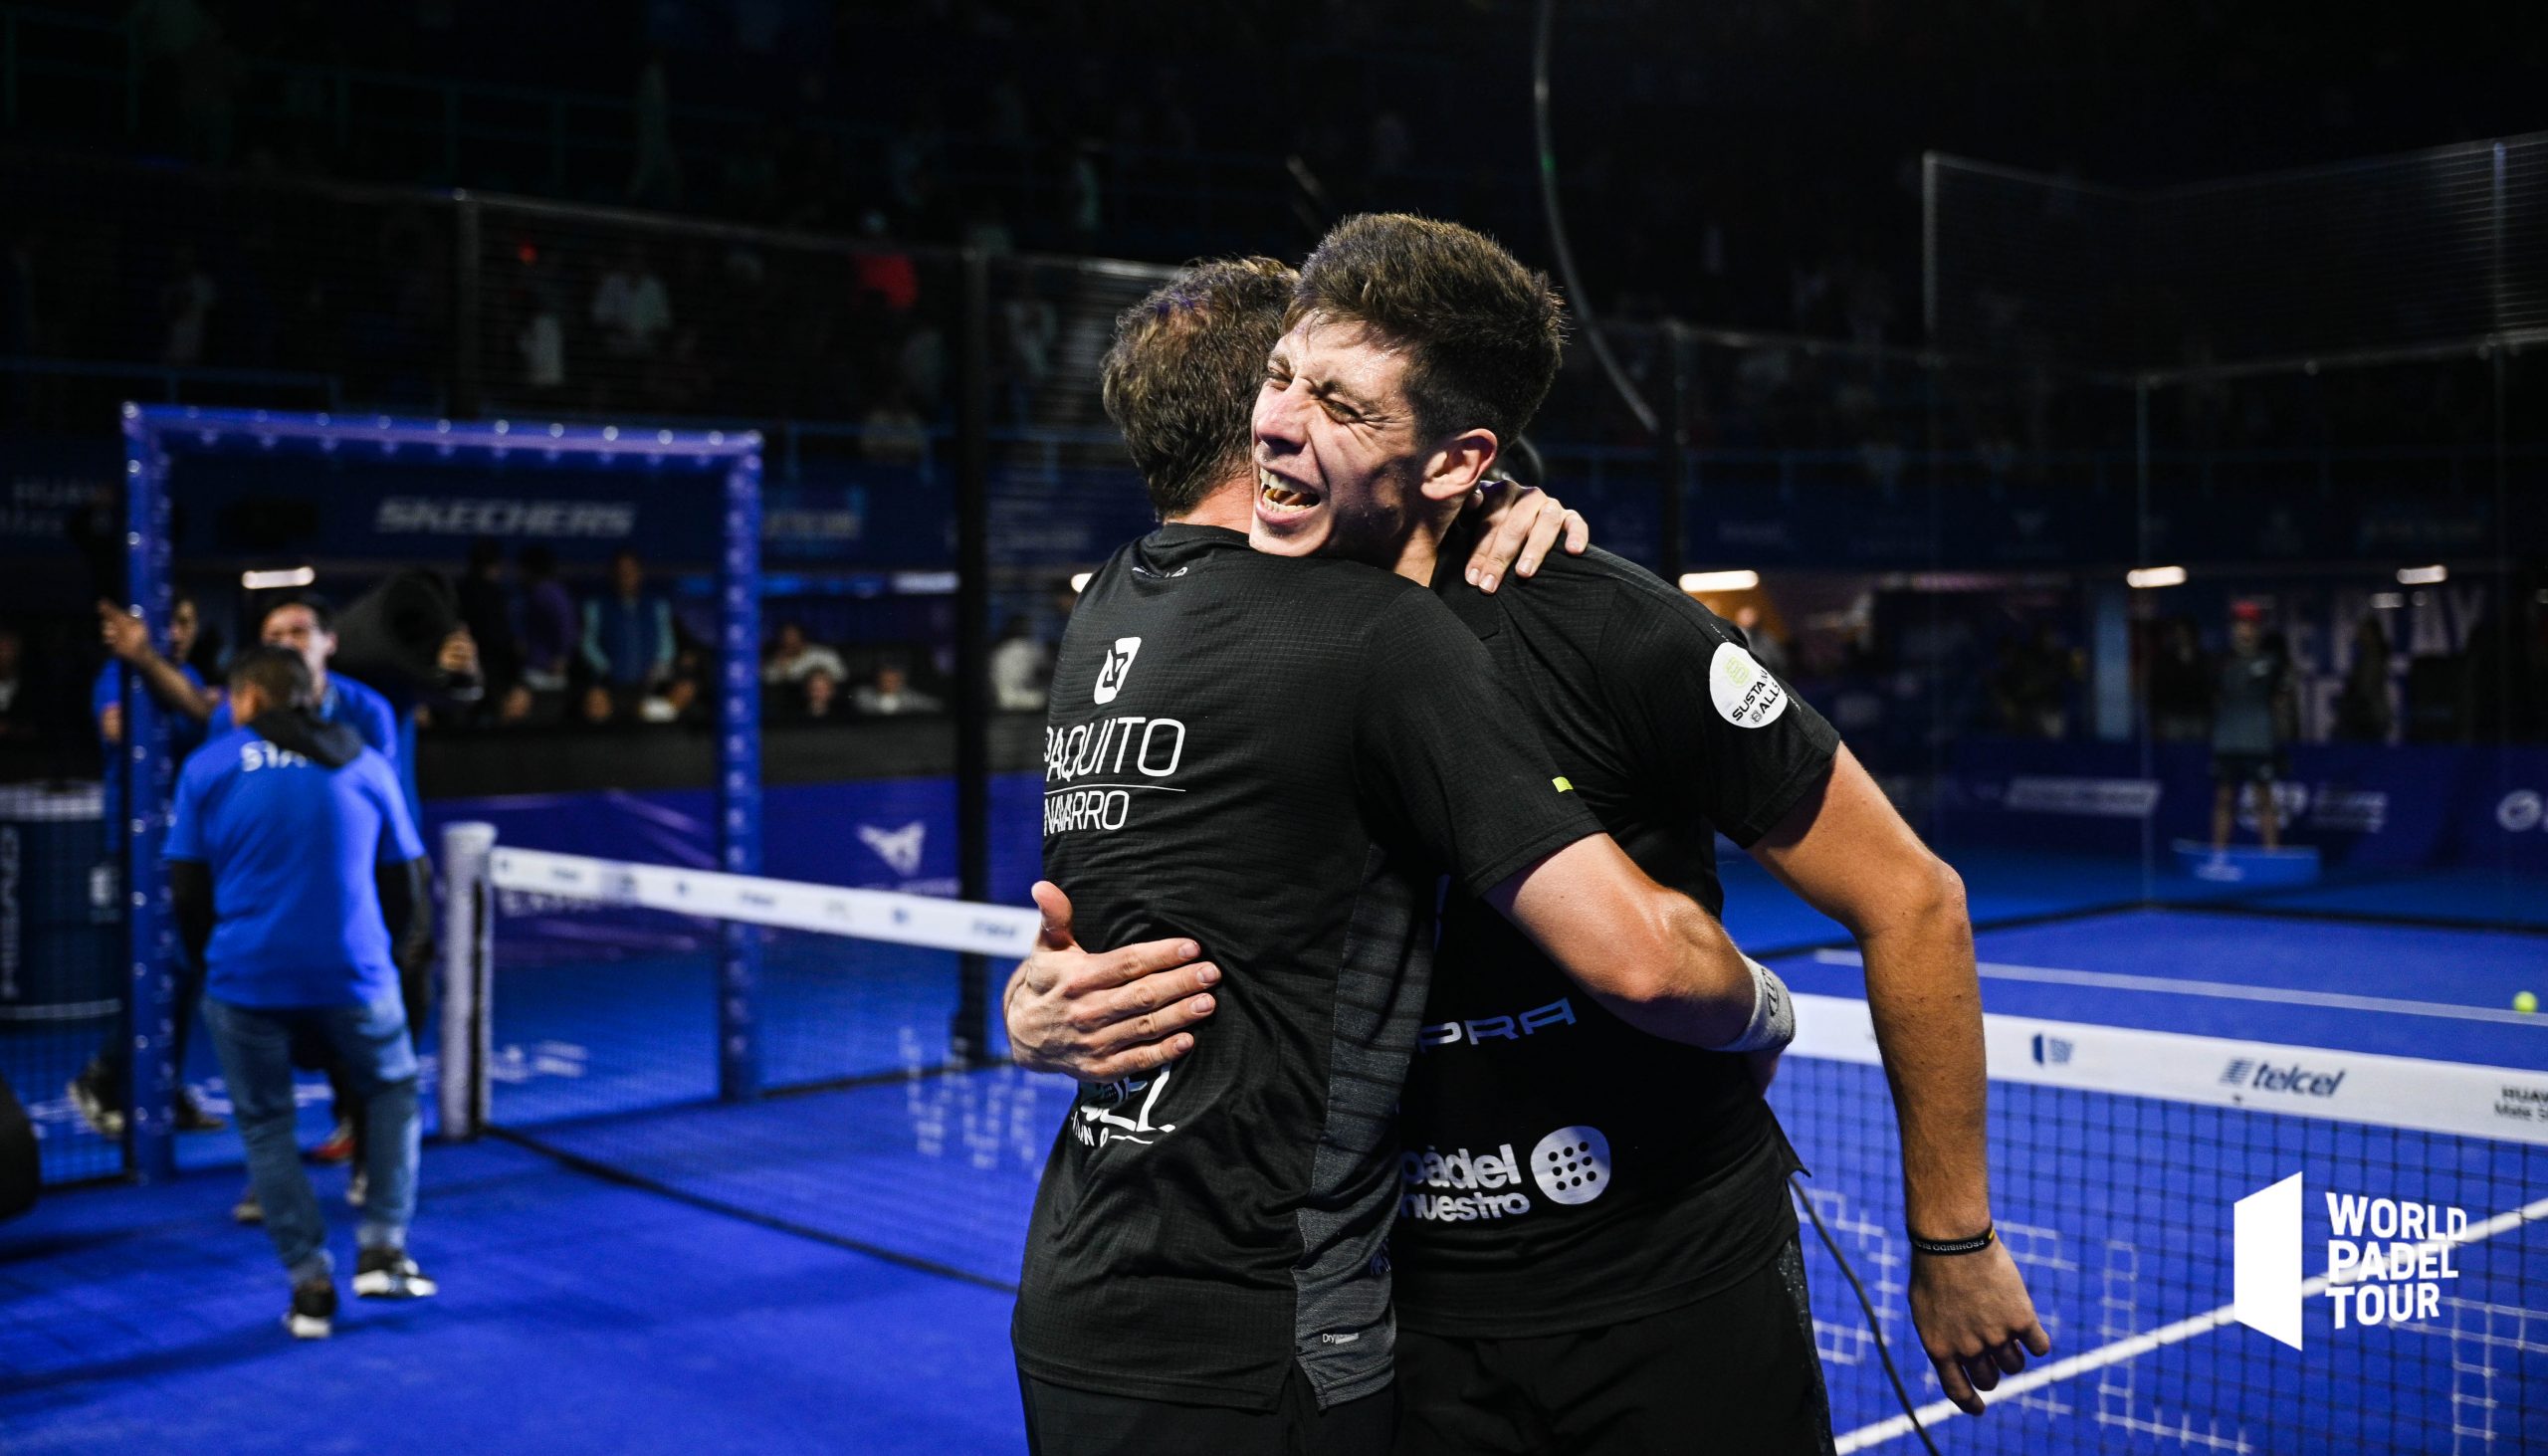 Mexico Open: Navarro and Tello best Lima and Stupaczuk to win first title together